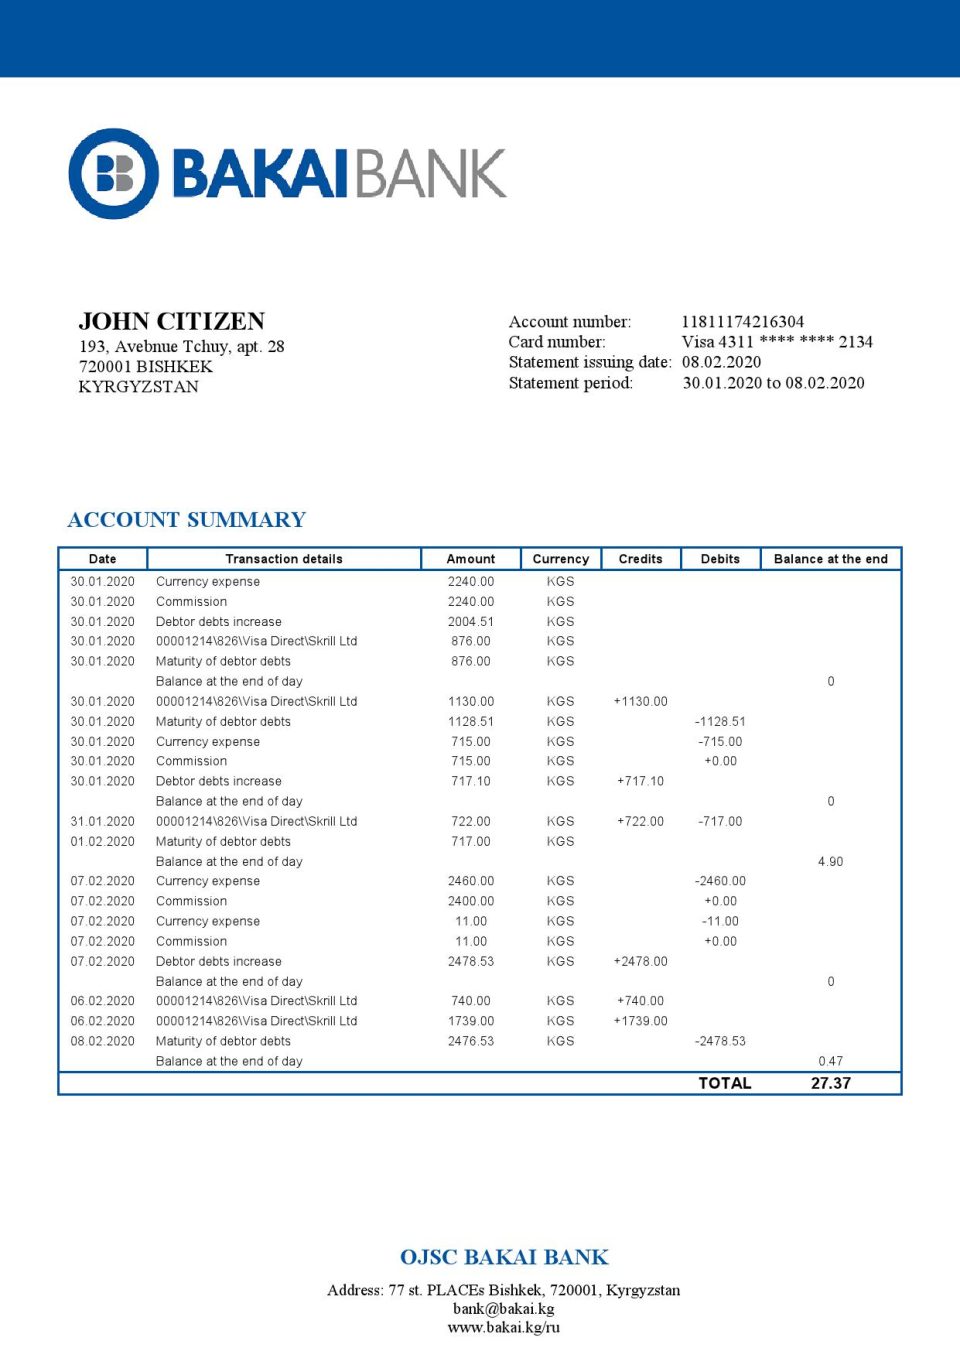 Kyrgyzstan OJSC Bakai Bank proof of address bank statement template in Word and PDF format